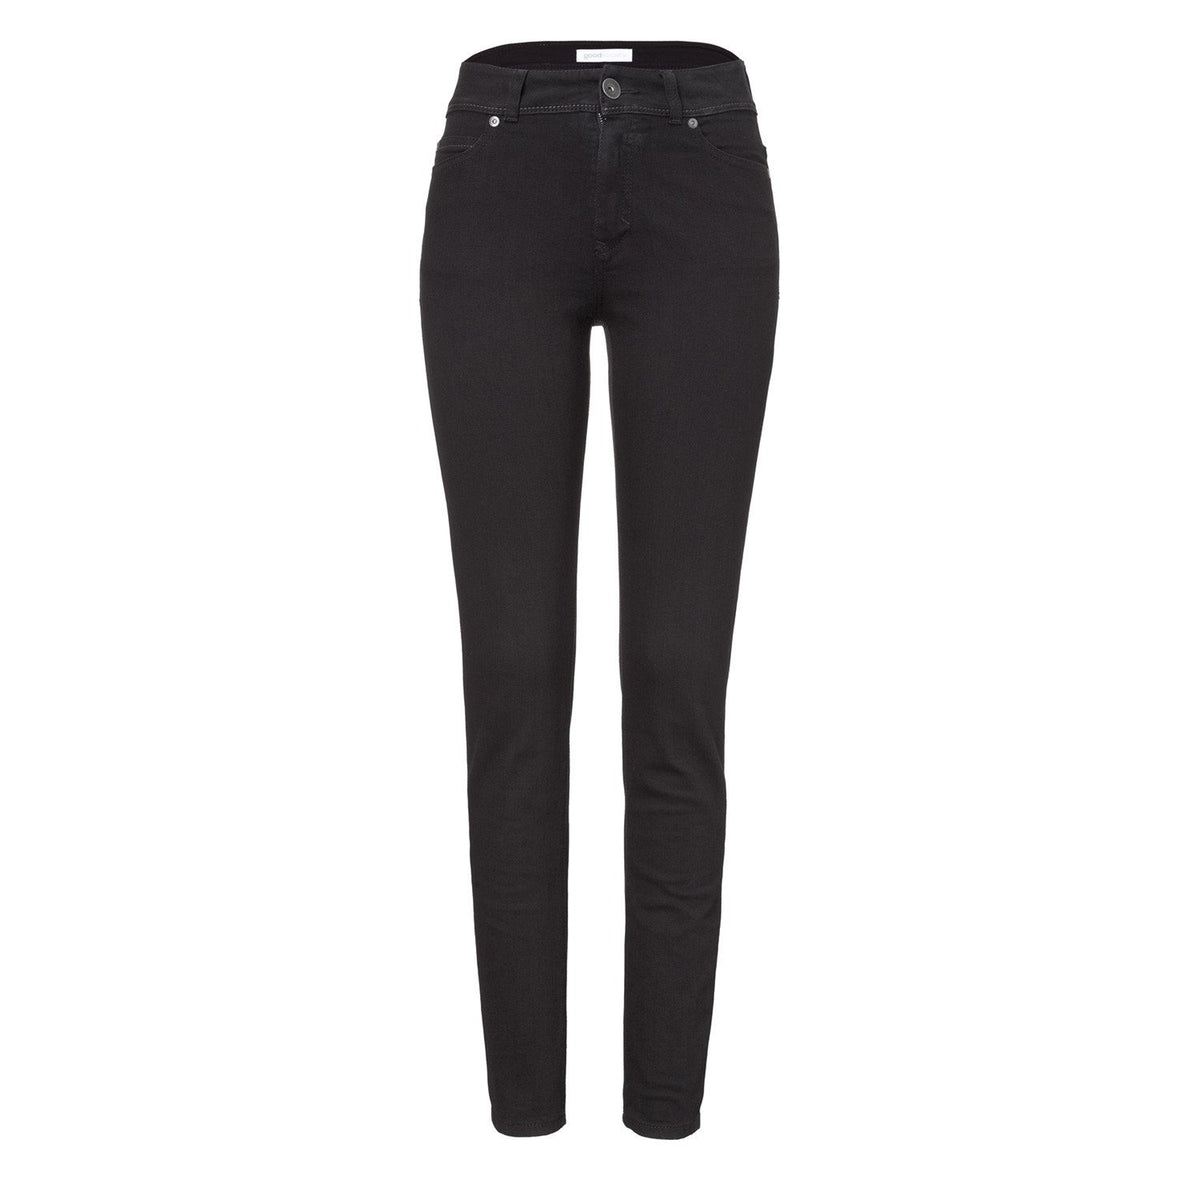 goodsociety Womens High Rise Slim Jeans - Black One Wash